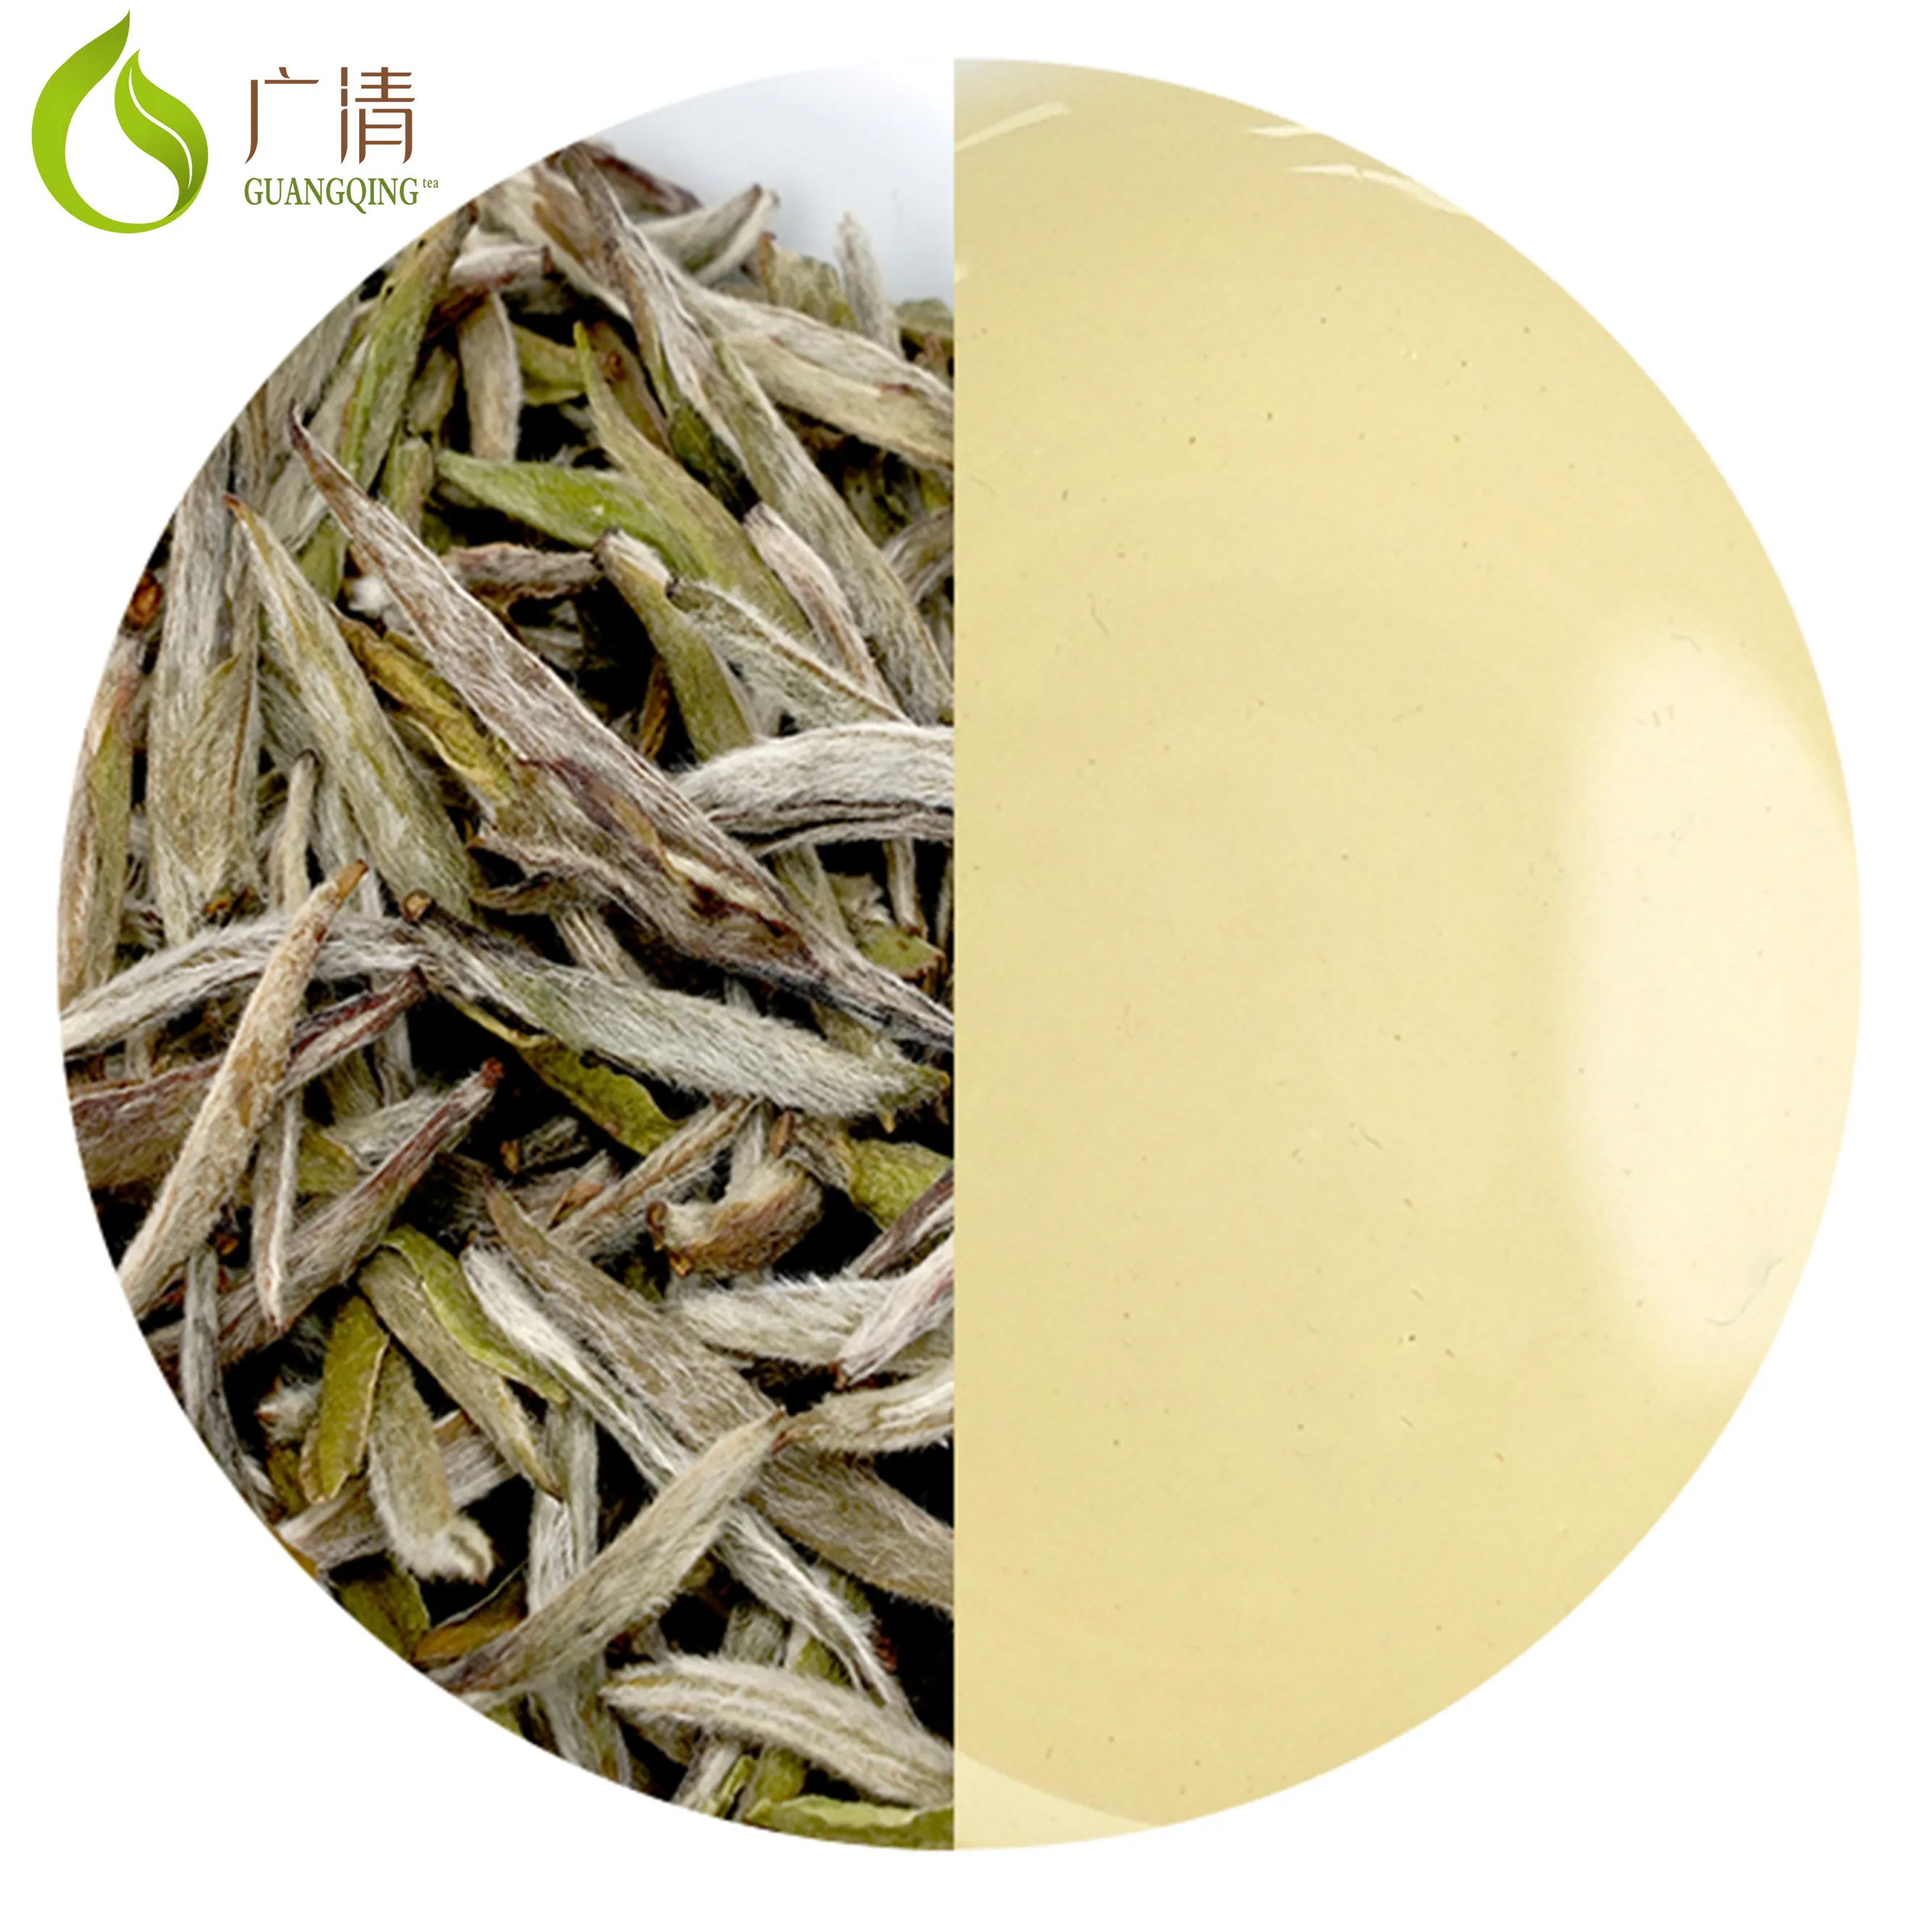 GUANGQING Early Spring Season Healthy Top Grade Fresh Loose tea of White Silver Needle From High Mountain